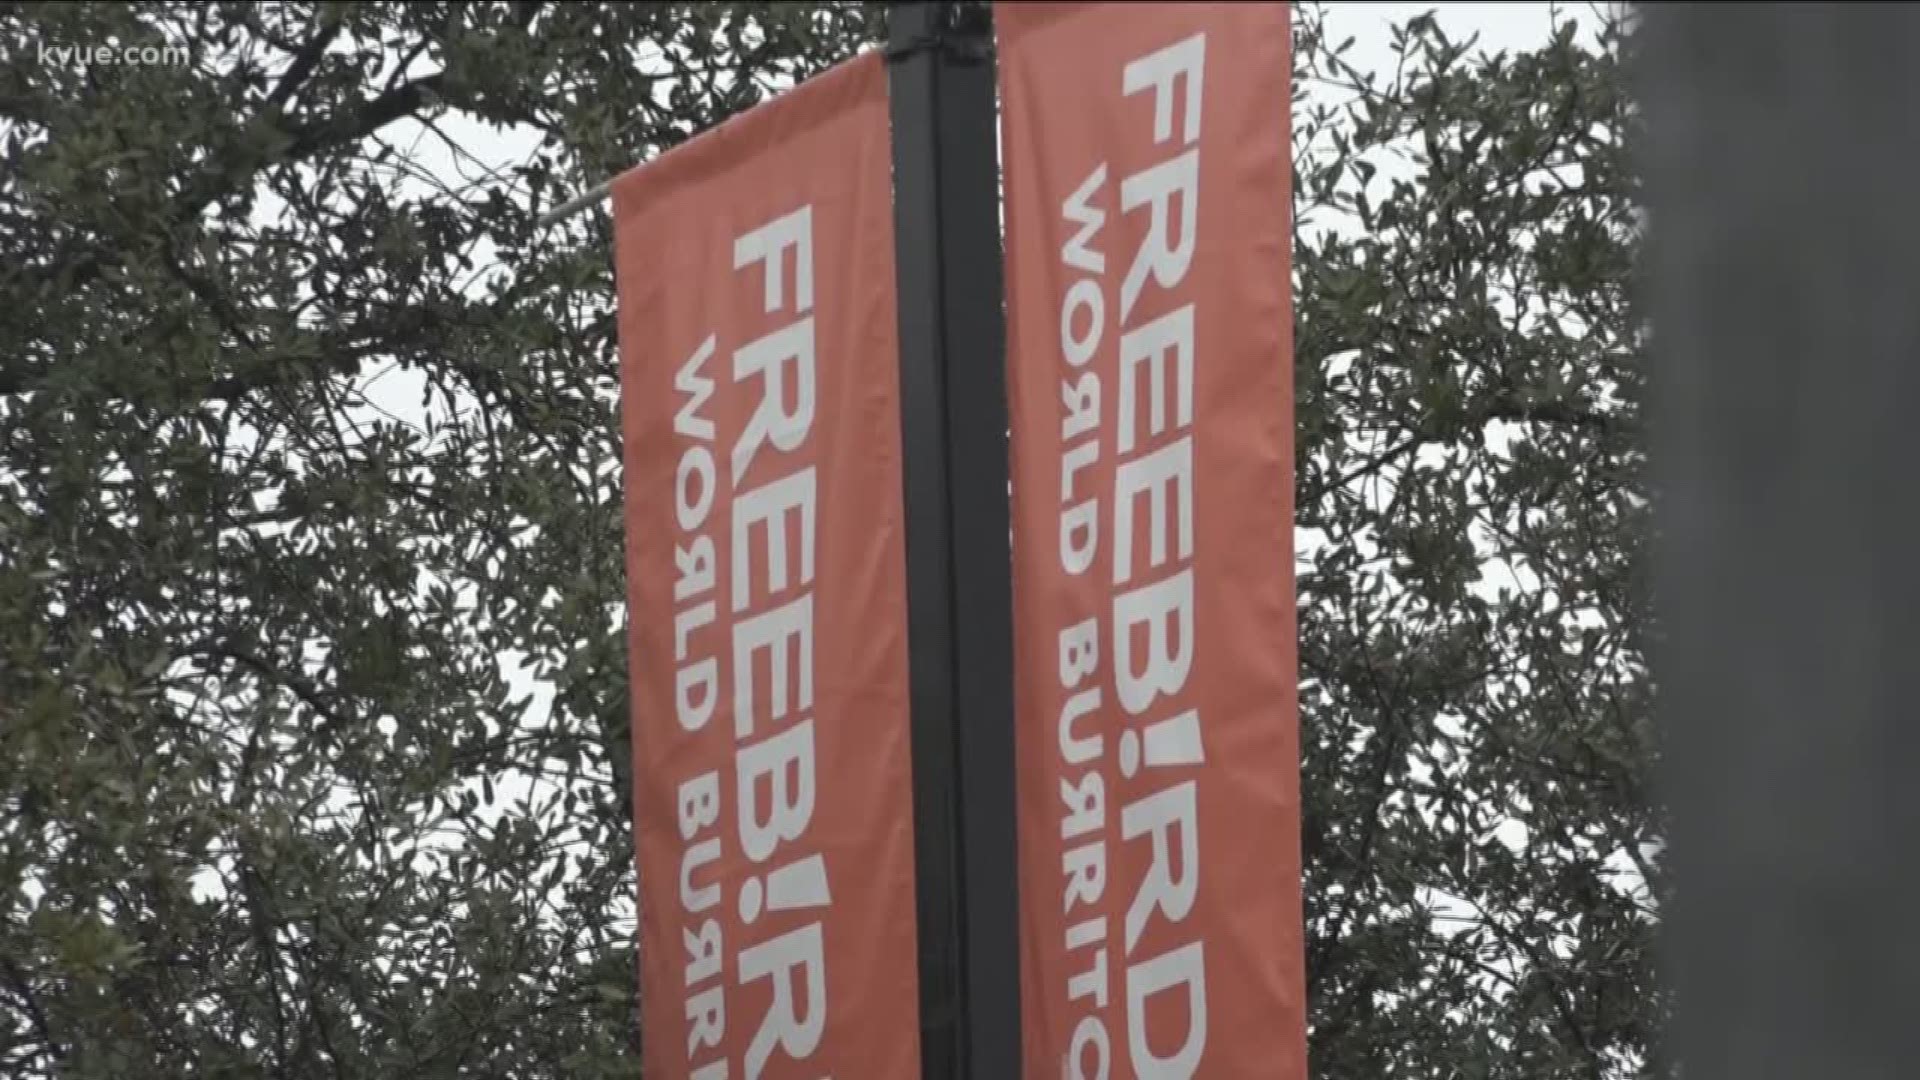 For the first time since an employee was killed at the restaurant, a Freebirds World Burrito in South Austin has reopened.